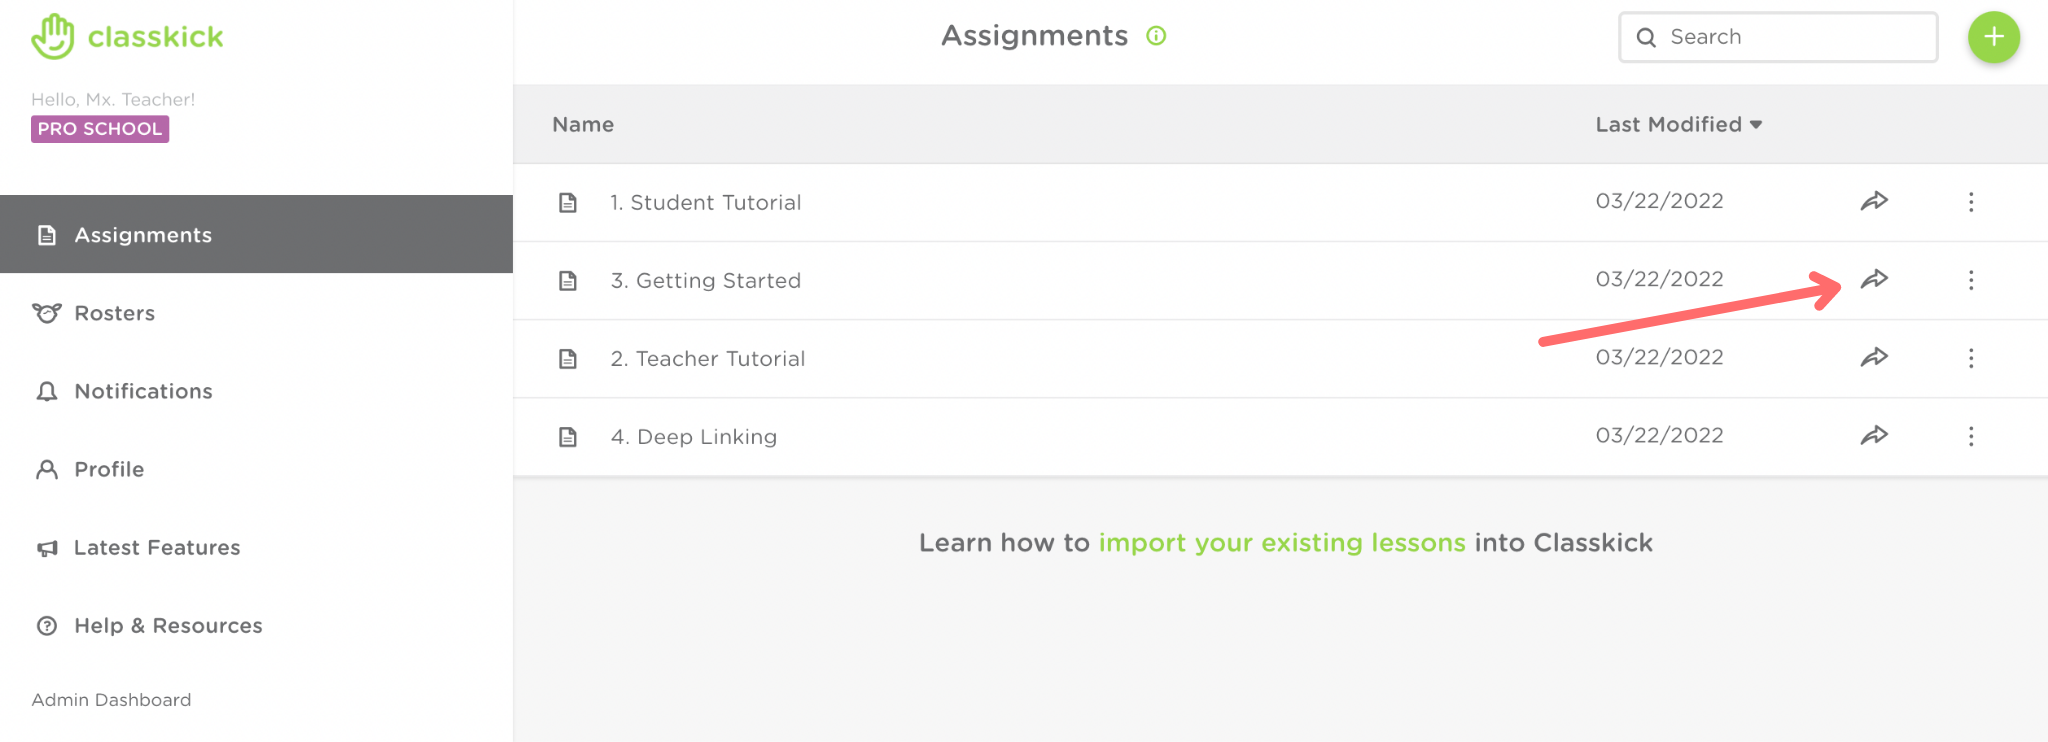 A teacher’s assignments dashboard. A red arrow points to the share assignment icon to the right of the Getting started assignment.